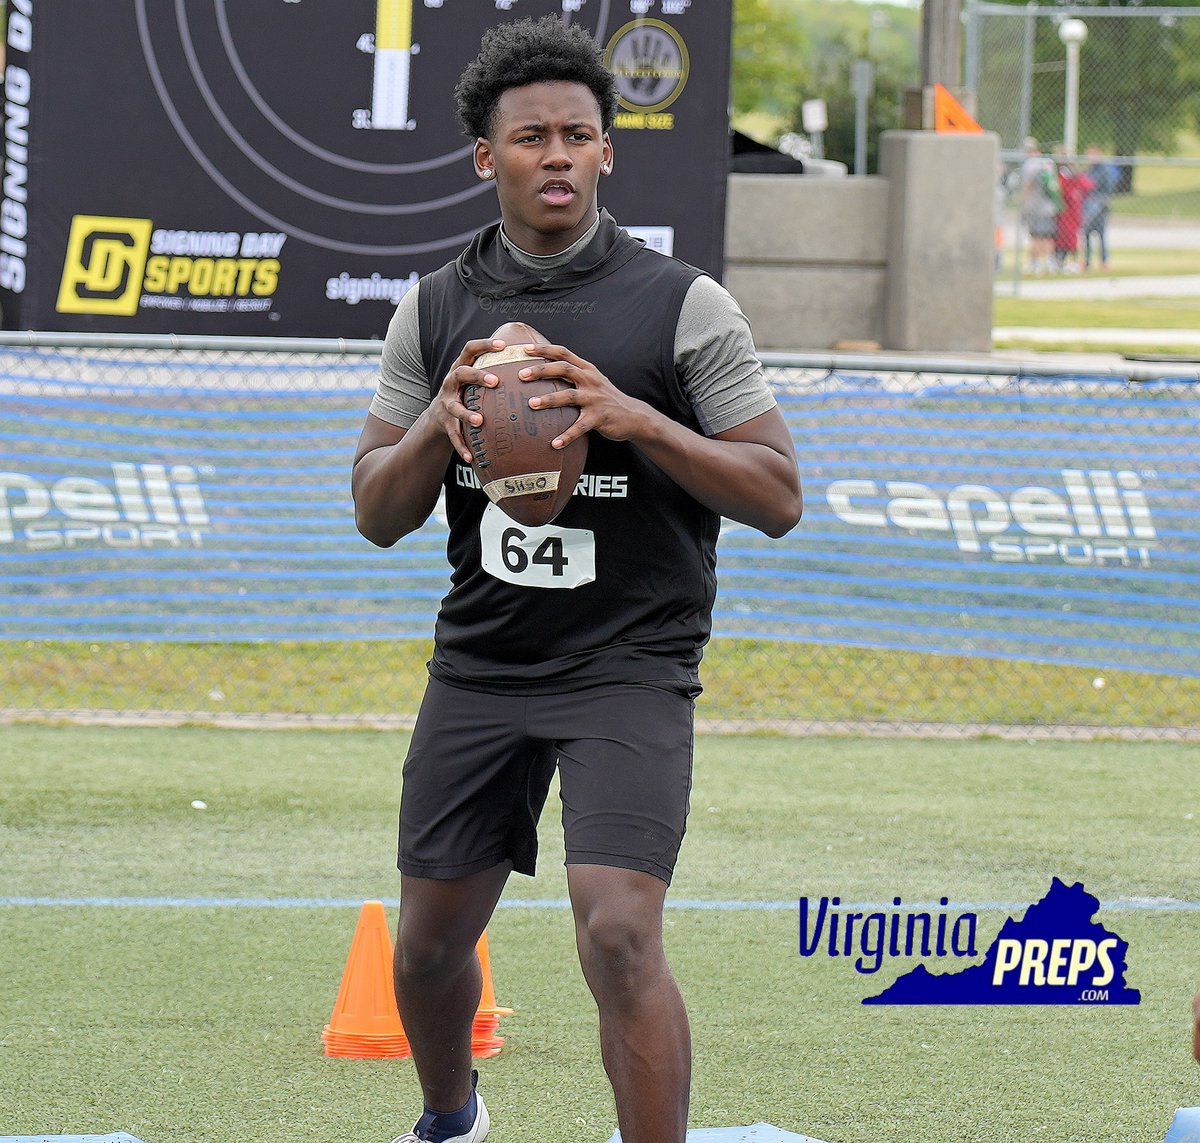 The US Army Bowl Combine @ArmyBowlCombine featured several QB's with offers including Oscar Smith @OscarSmithFB rising soph @LonnieAndrewsLA who will be featured on Virginiapreps.Com @VaPrepsRivals Prospect article